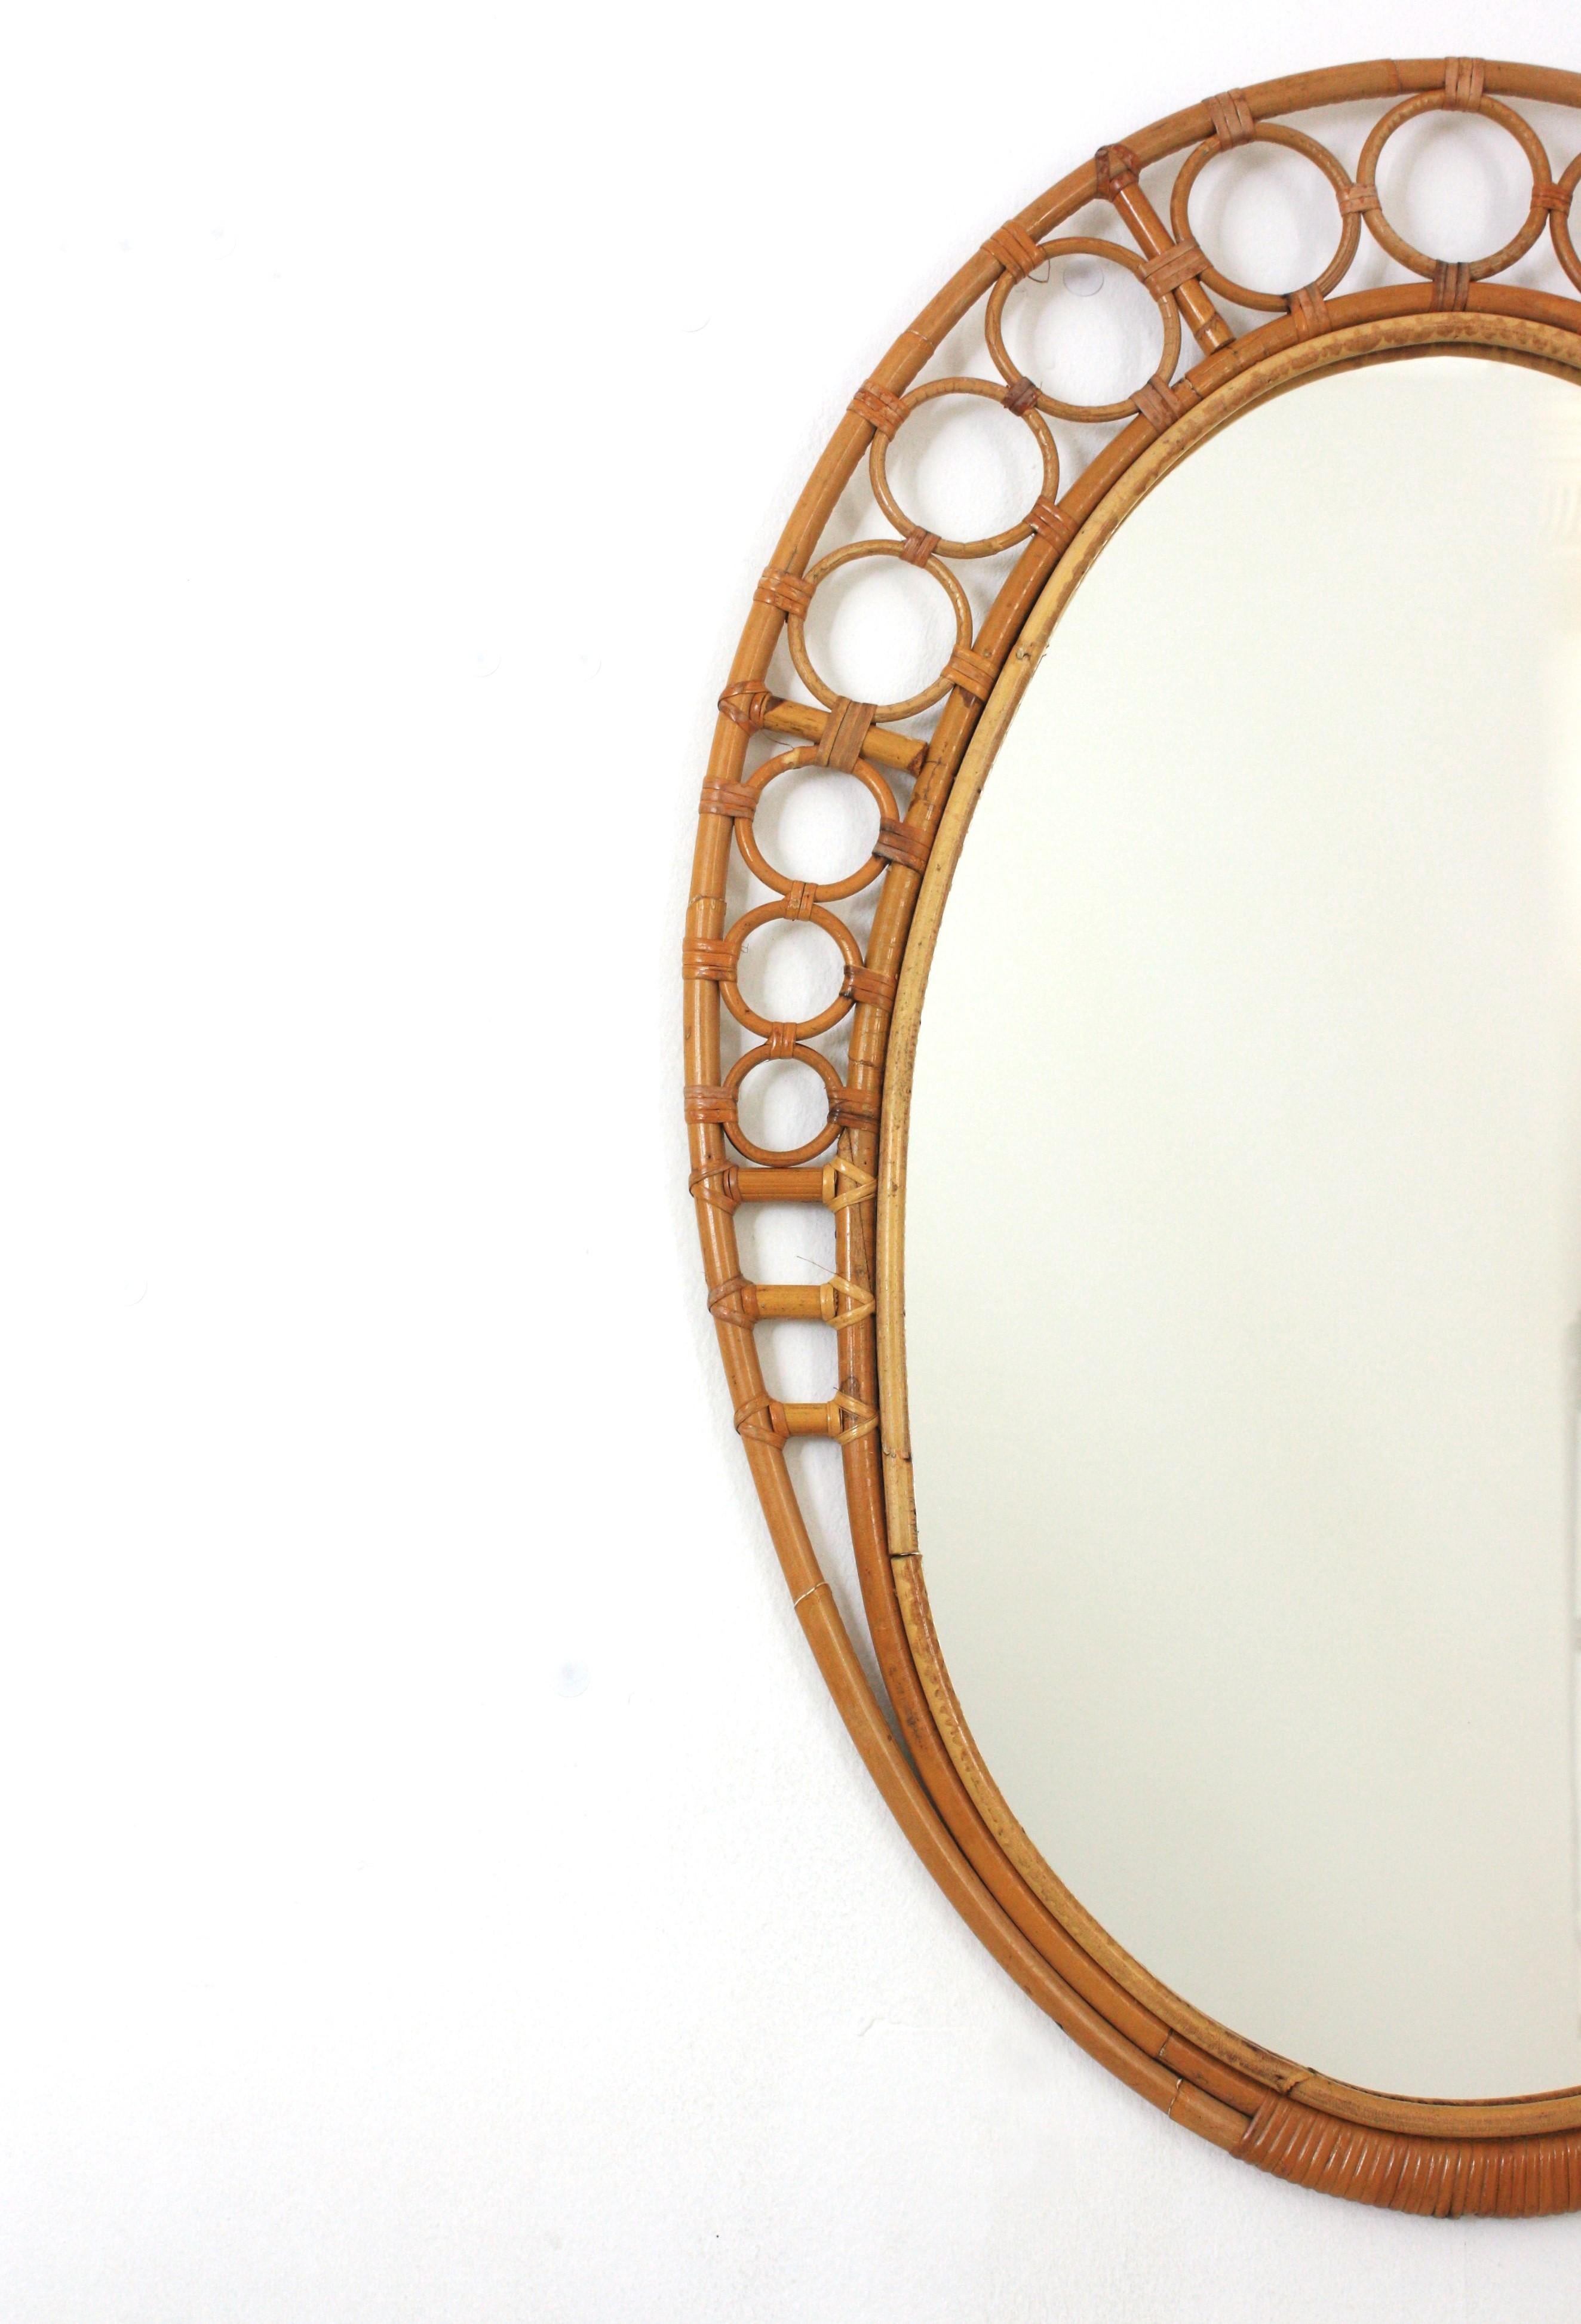 Bamboo Rattan Oval Mirror with Rings Frame, 1960s For Sale 1